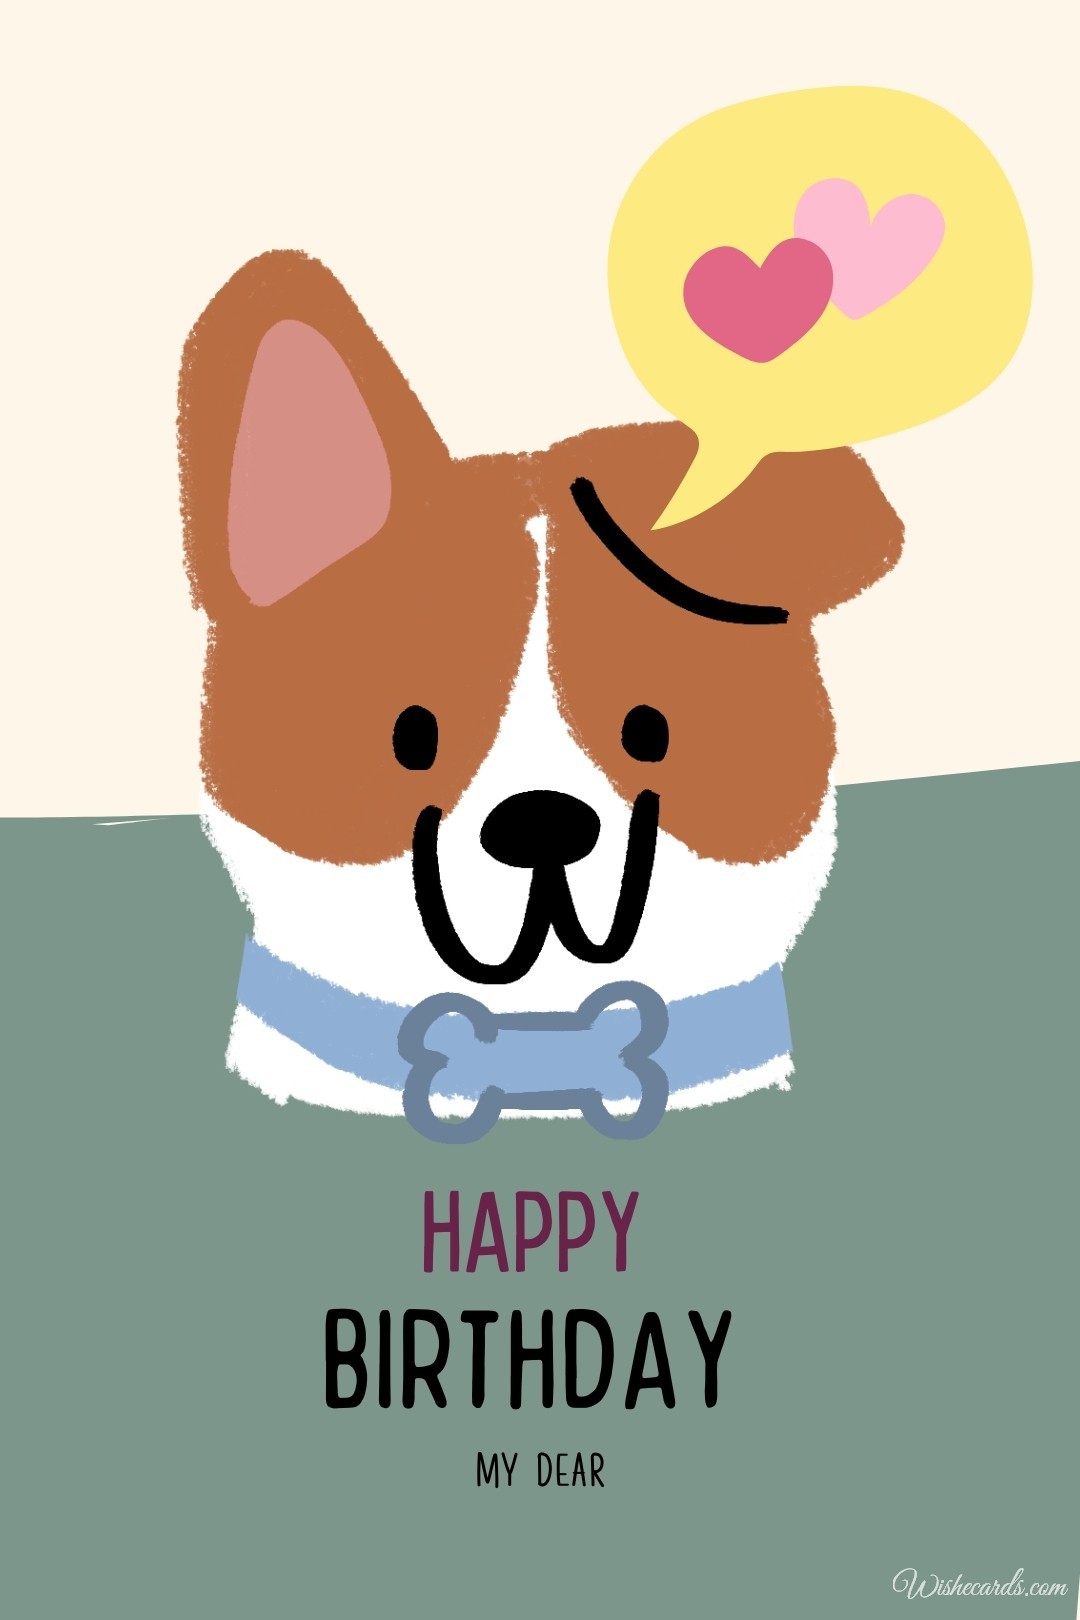 Cute Happy Birthday Picture For Woman With Dog